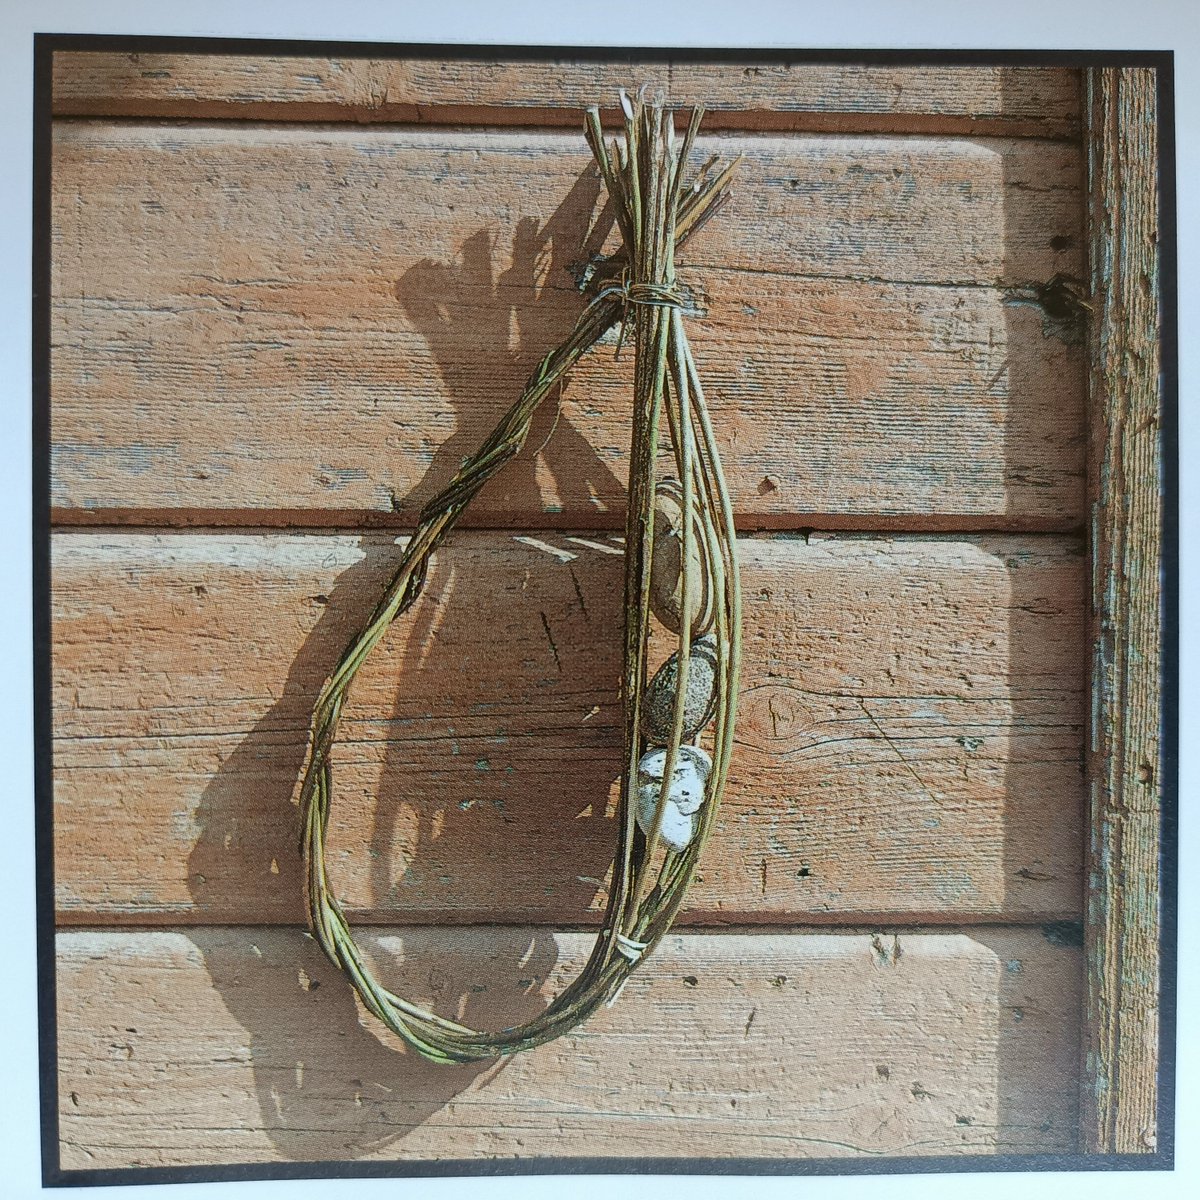 People of the old religion in W Slovenija used to make a 'juračac' on the 3rd full moon to hang above the stable door. 13 peeled twiggs and 3 pebbles of different colours knitted in. This wreath protected the cattle agaist spells, illness and blood & milk sucking snake 'kačunac'.